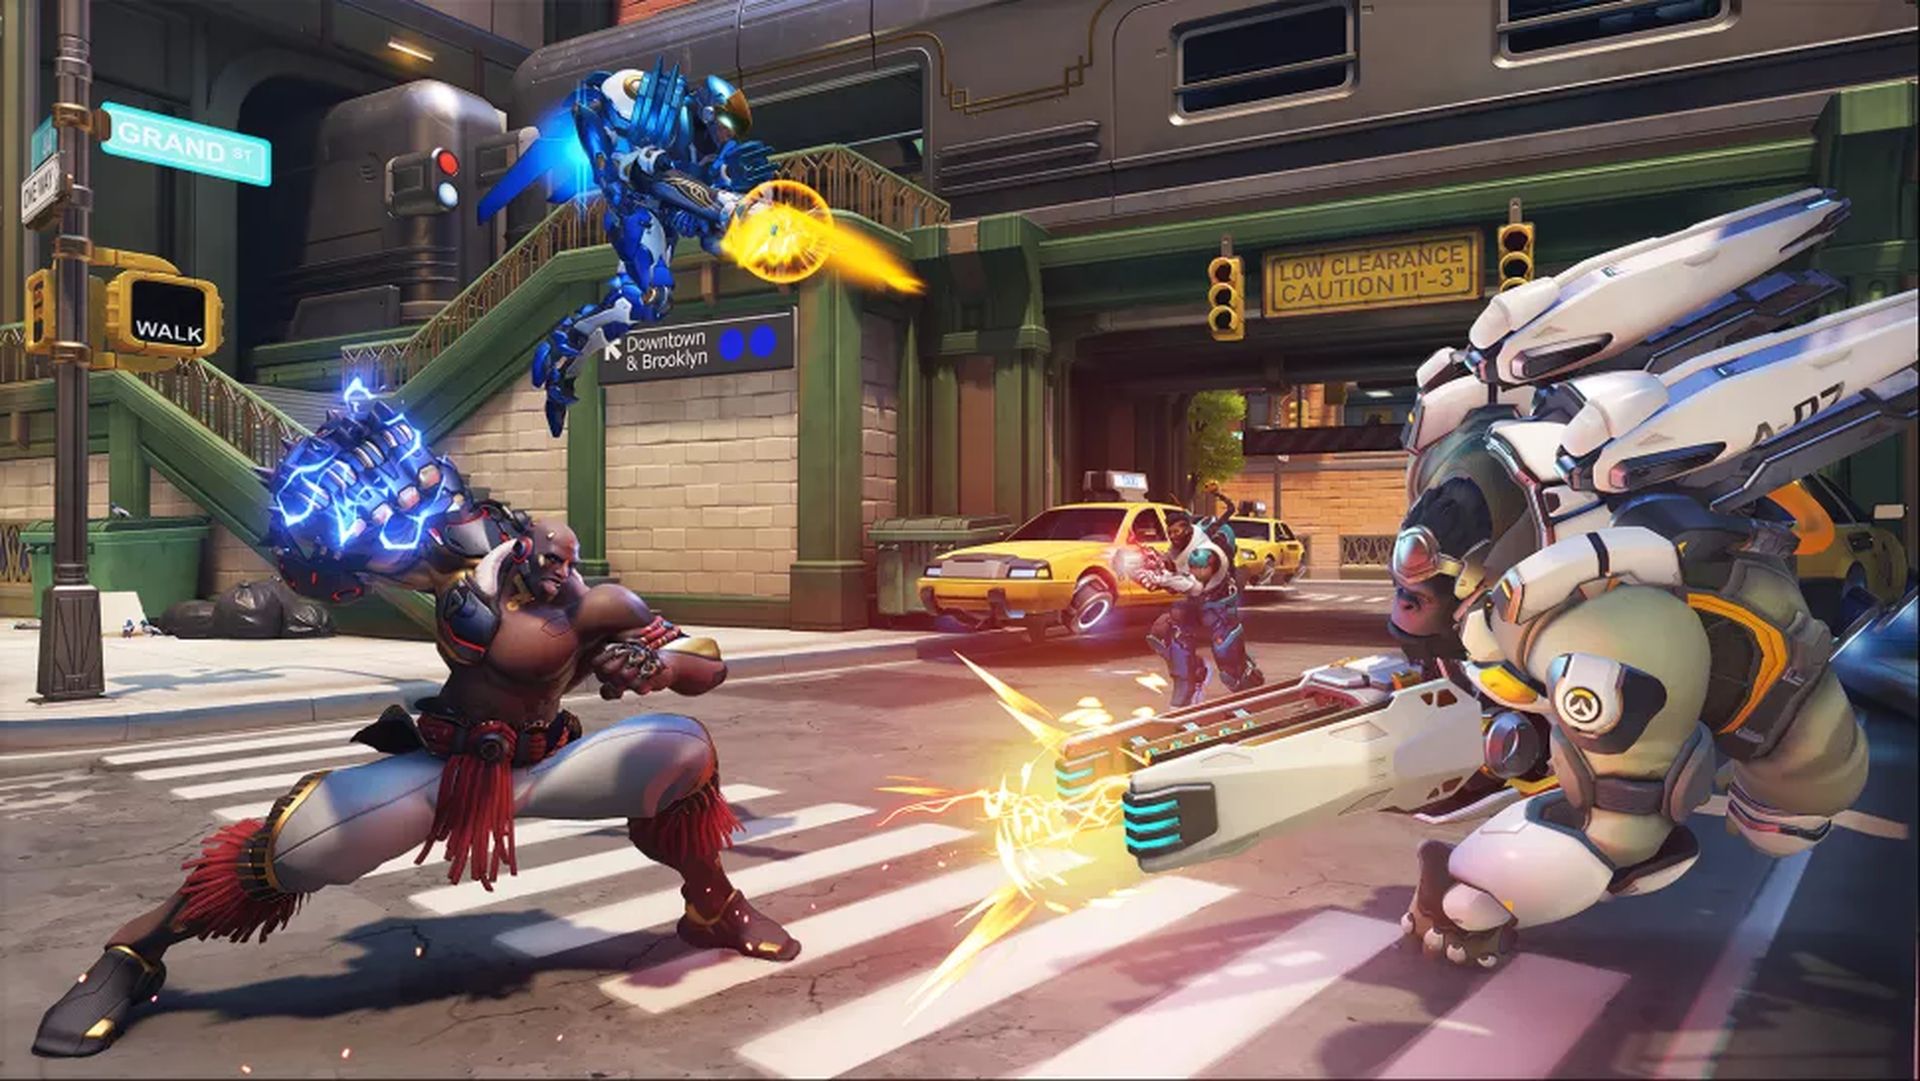 Is Overwatch 2 good? This is the question on many gamers' minds as the new game's PvP launches for everyone to enjoy. Overwatch 2 occupies a liminal zone...